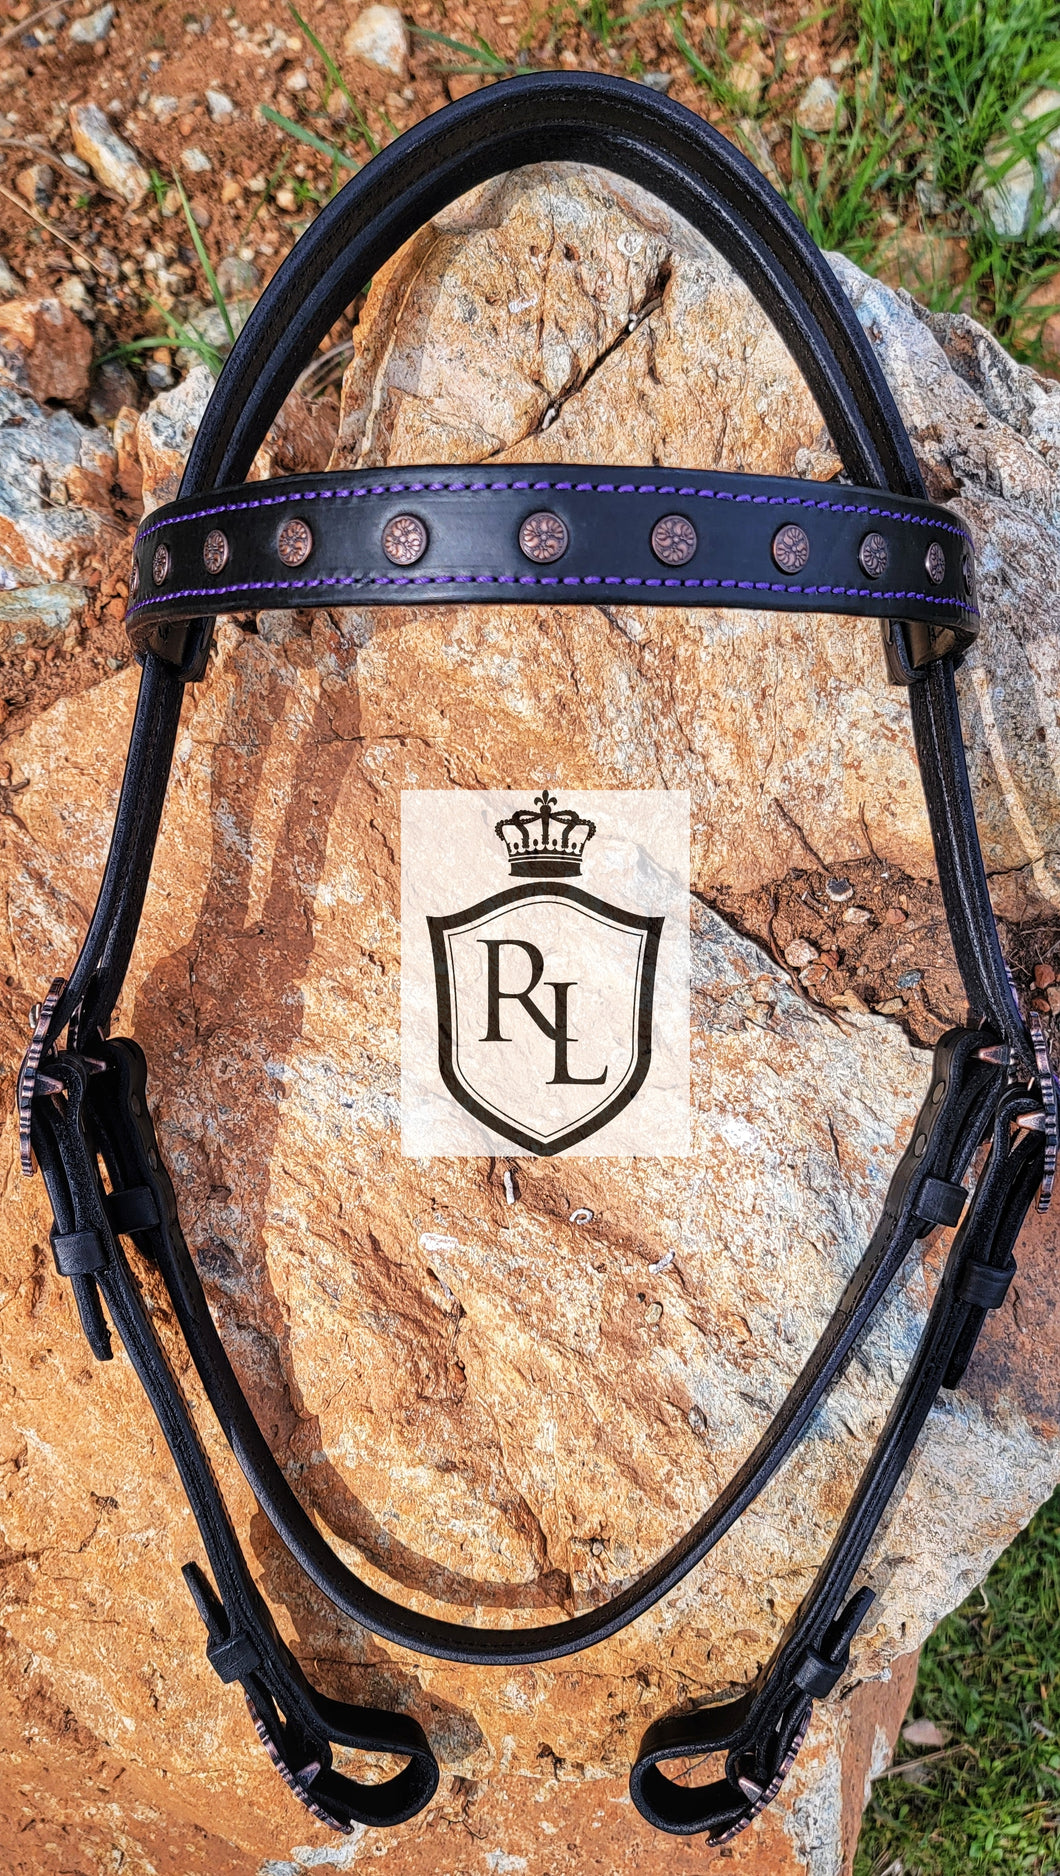 Purple and copper draft horse bridle